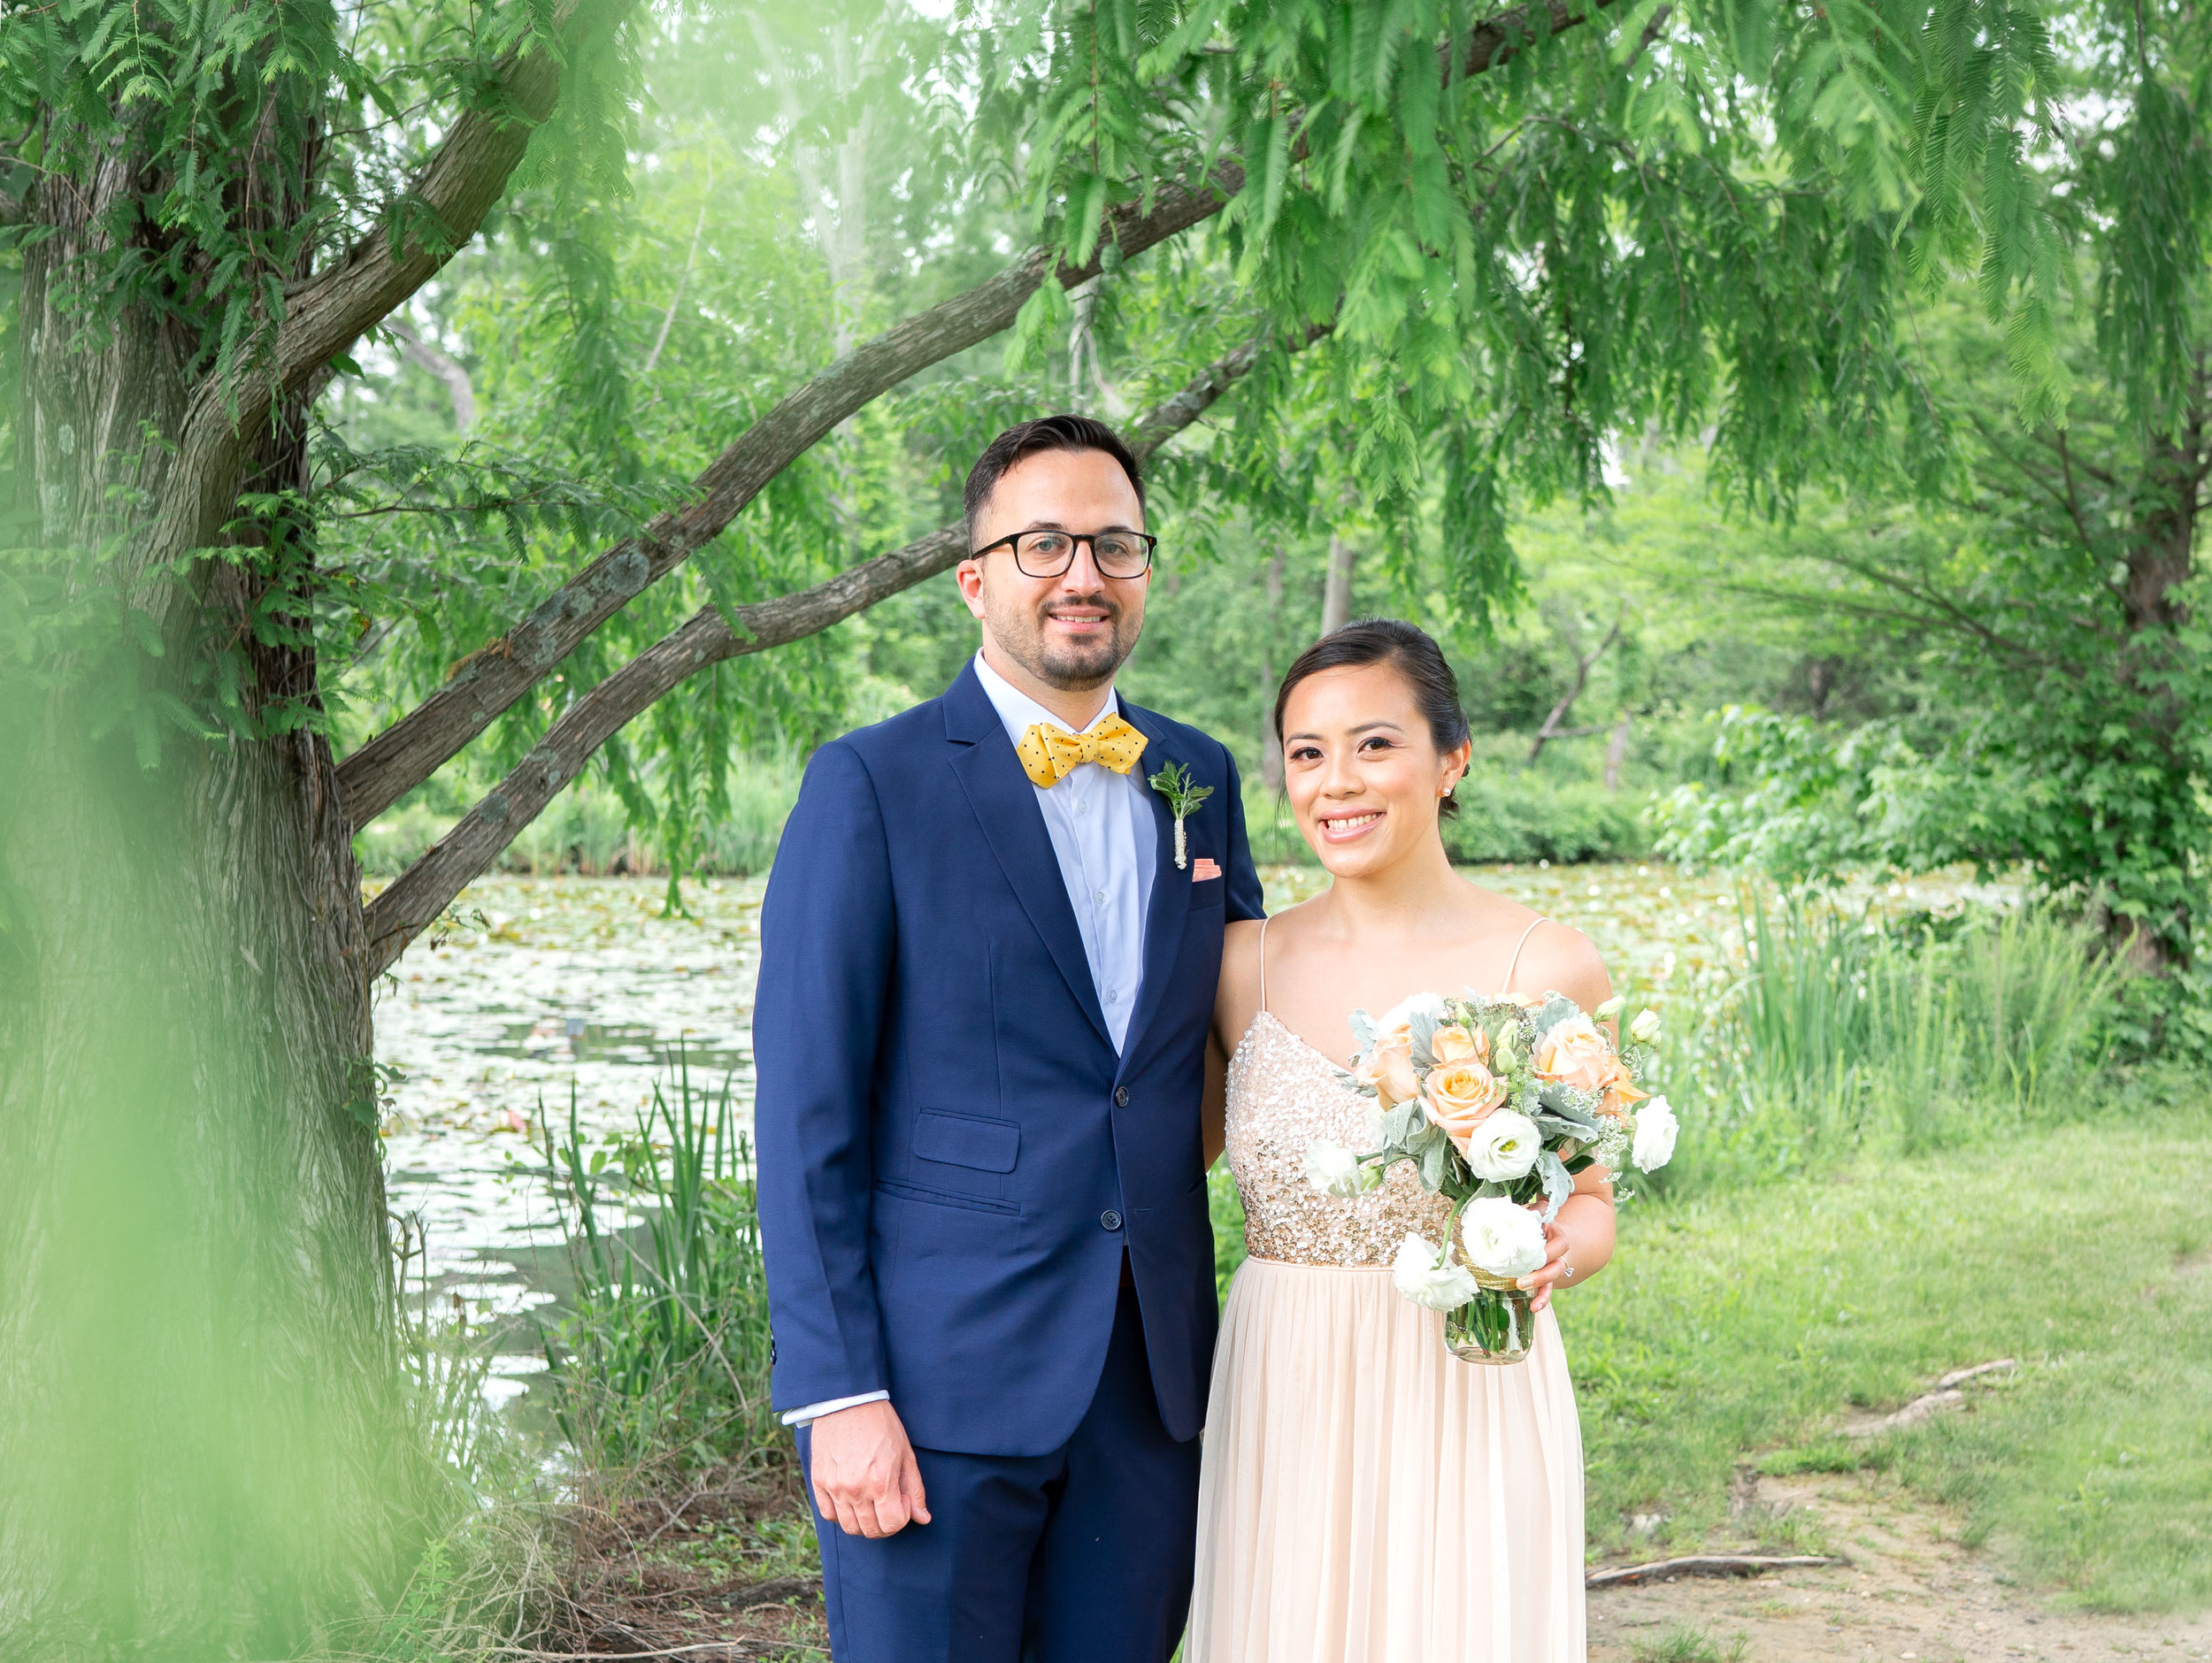 Kenilworth Aquatic gardens engagement and wedding portraits with bride and groom